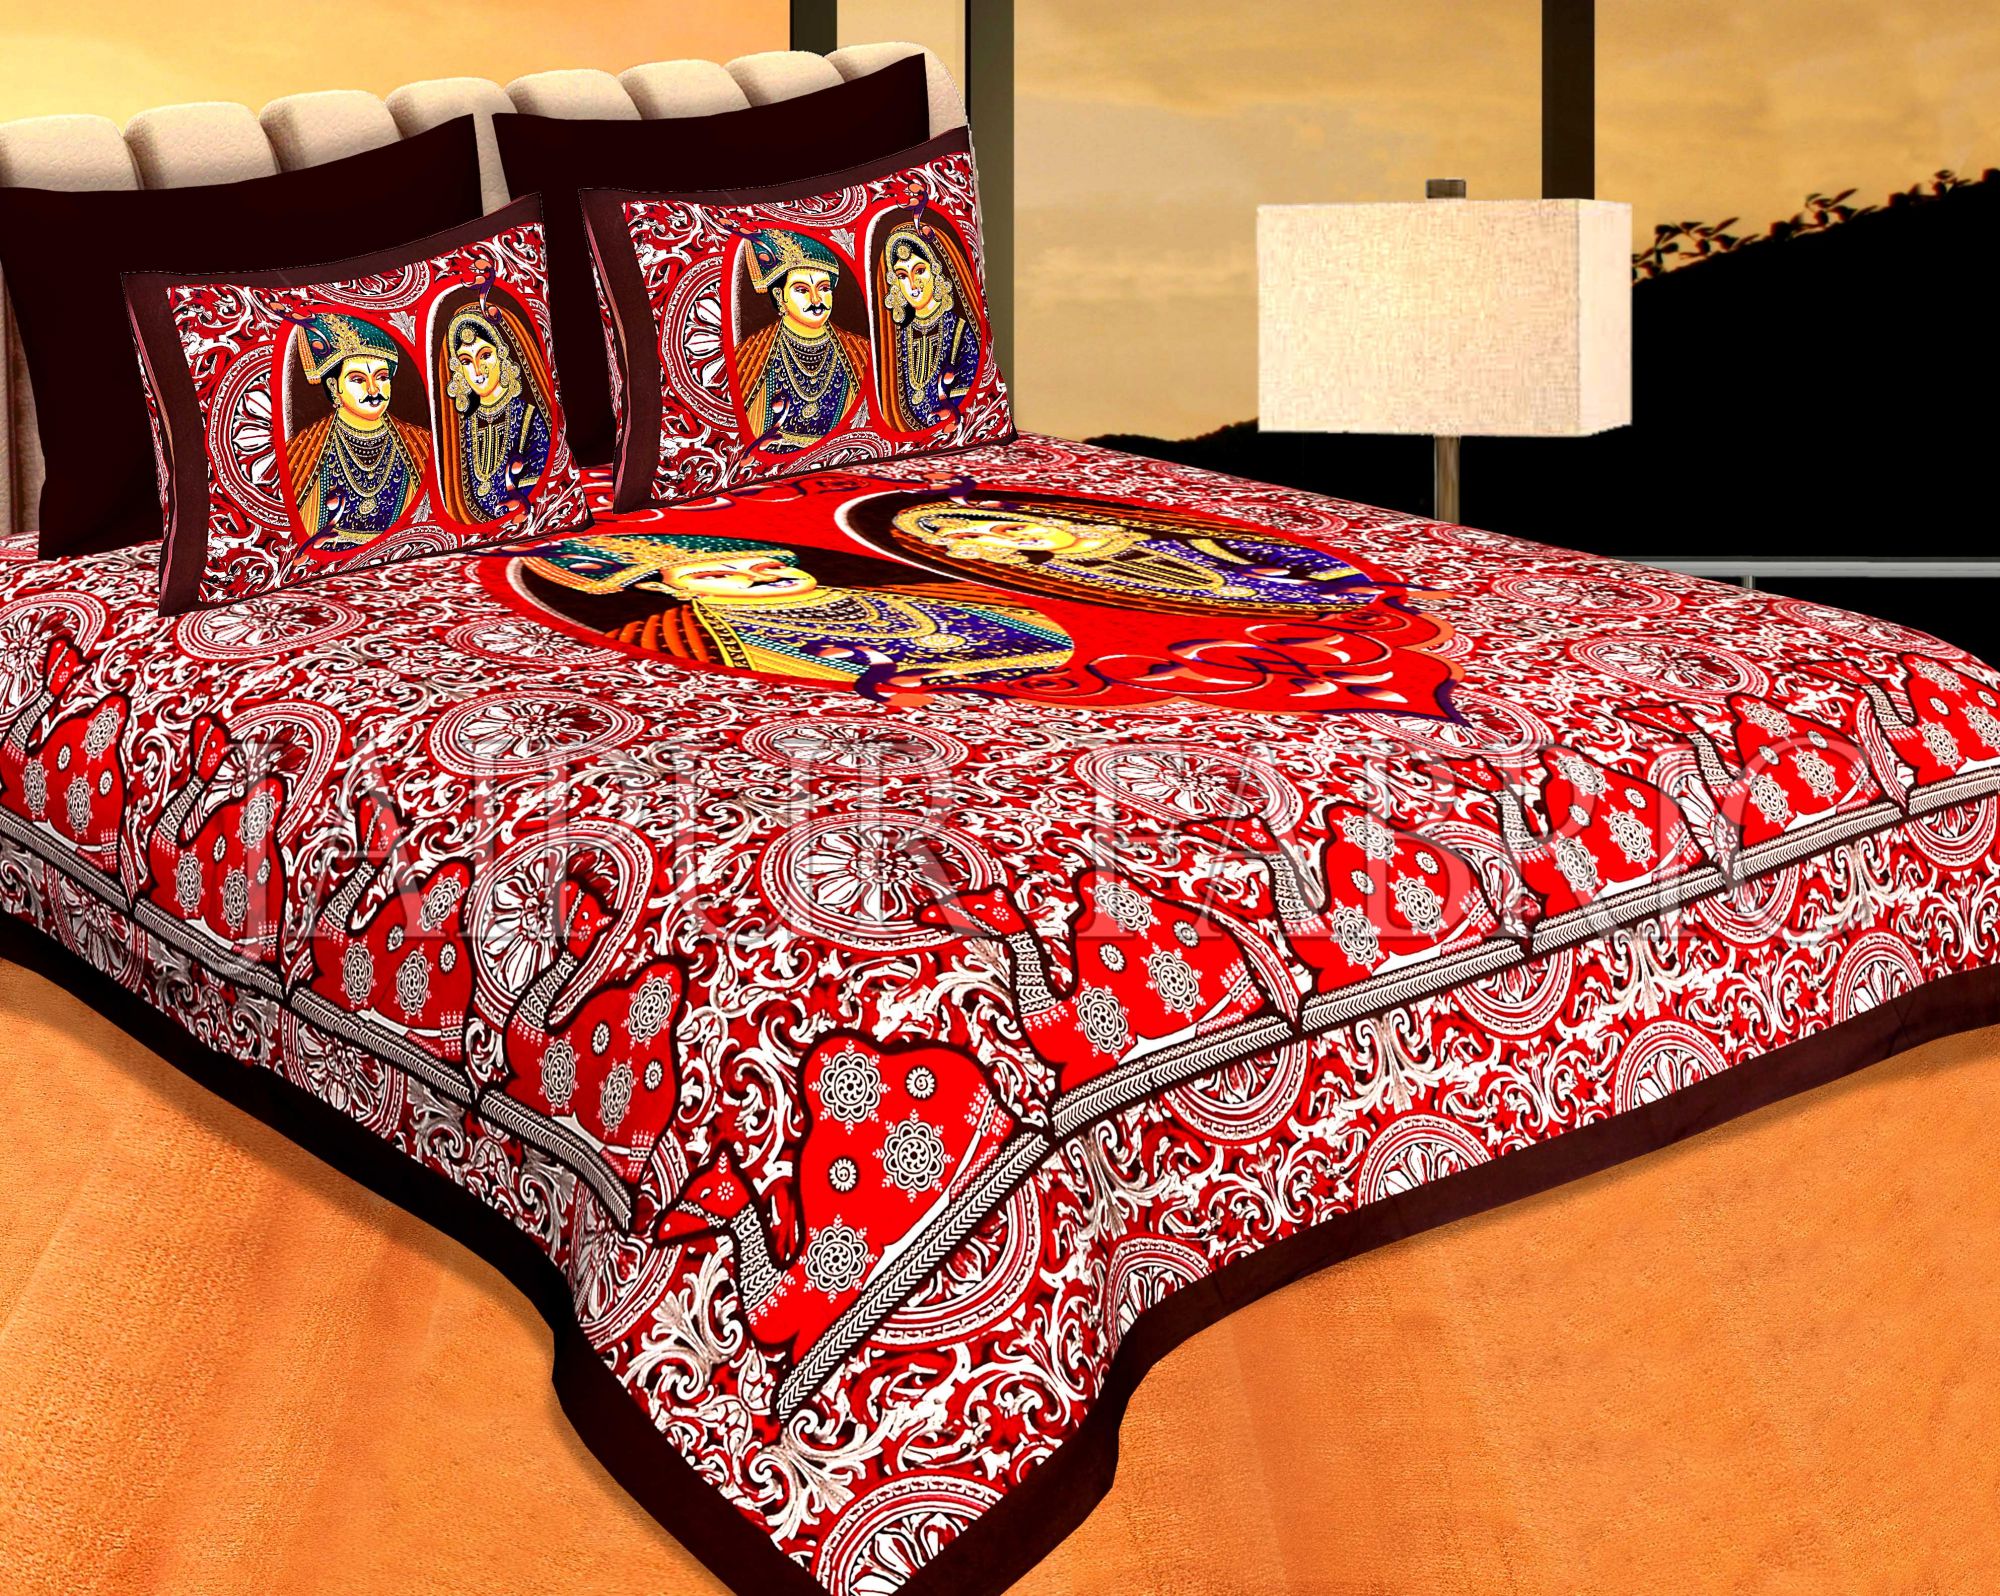 Coffe Color Border Red Base With Raja-Rani Print Pigment Cotton Double Bedsheet